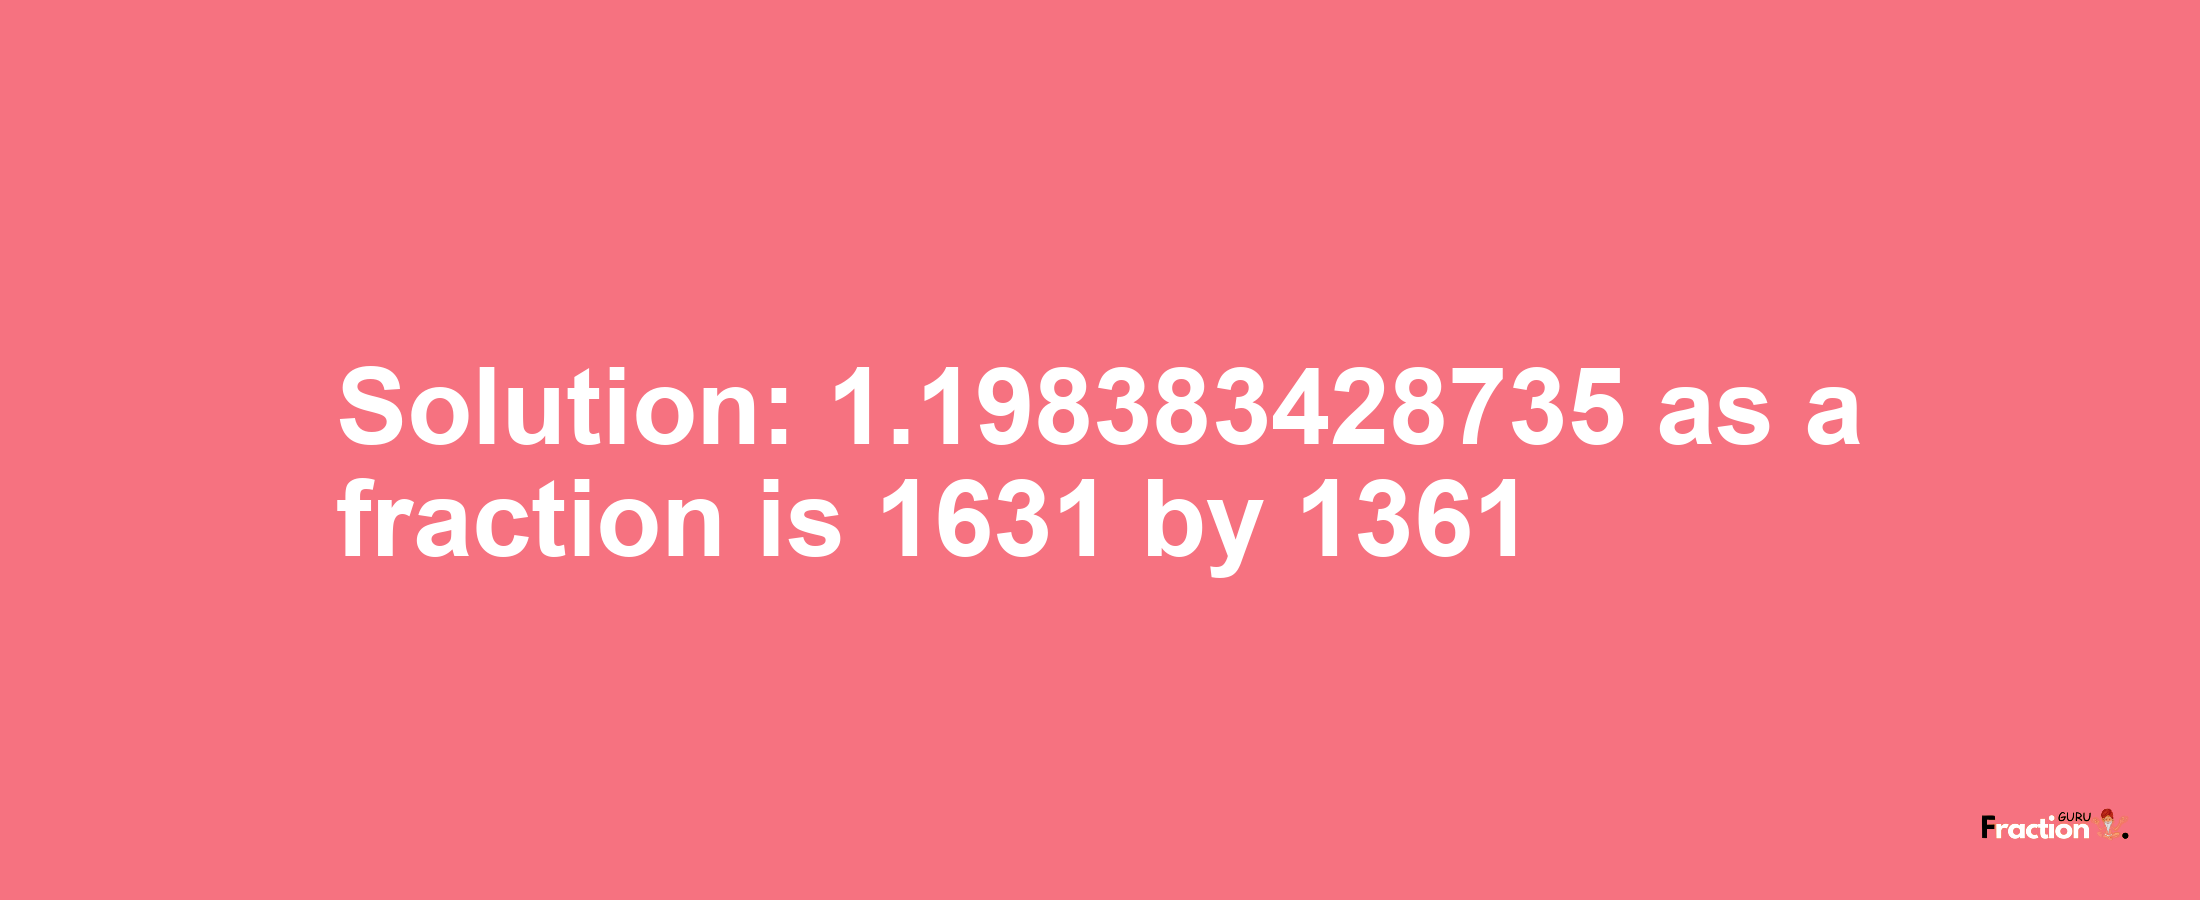 Solution:1.198383428735 as a fraction is 1631/1361